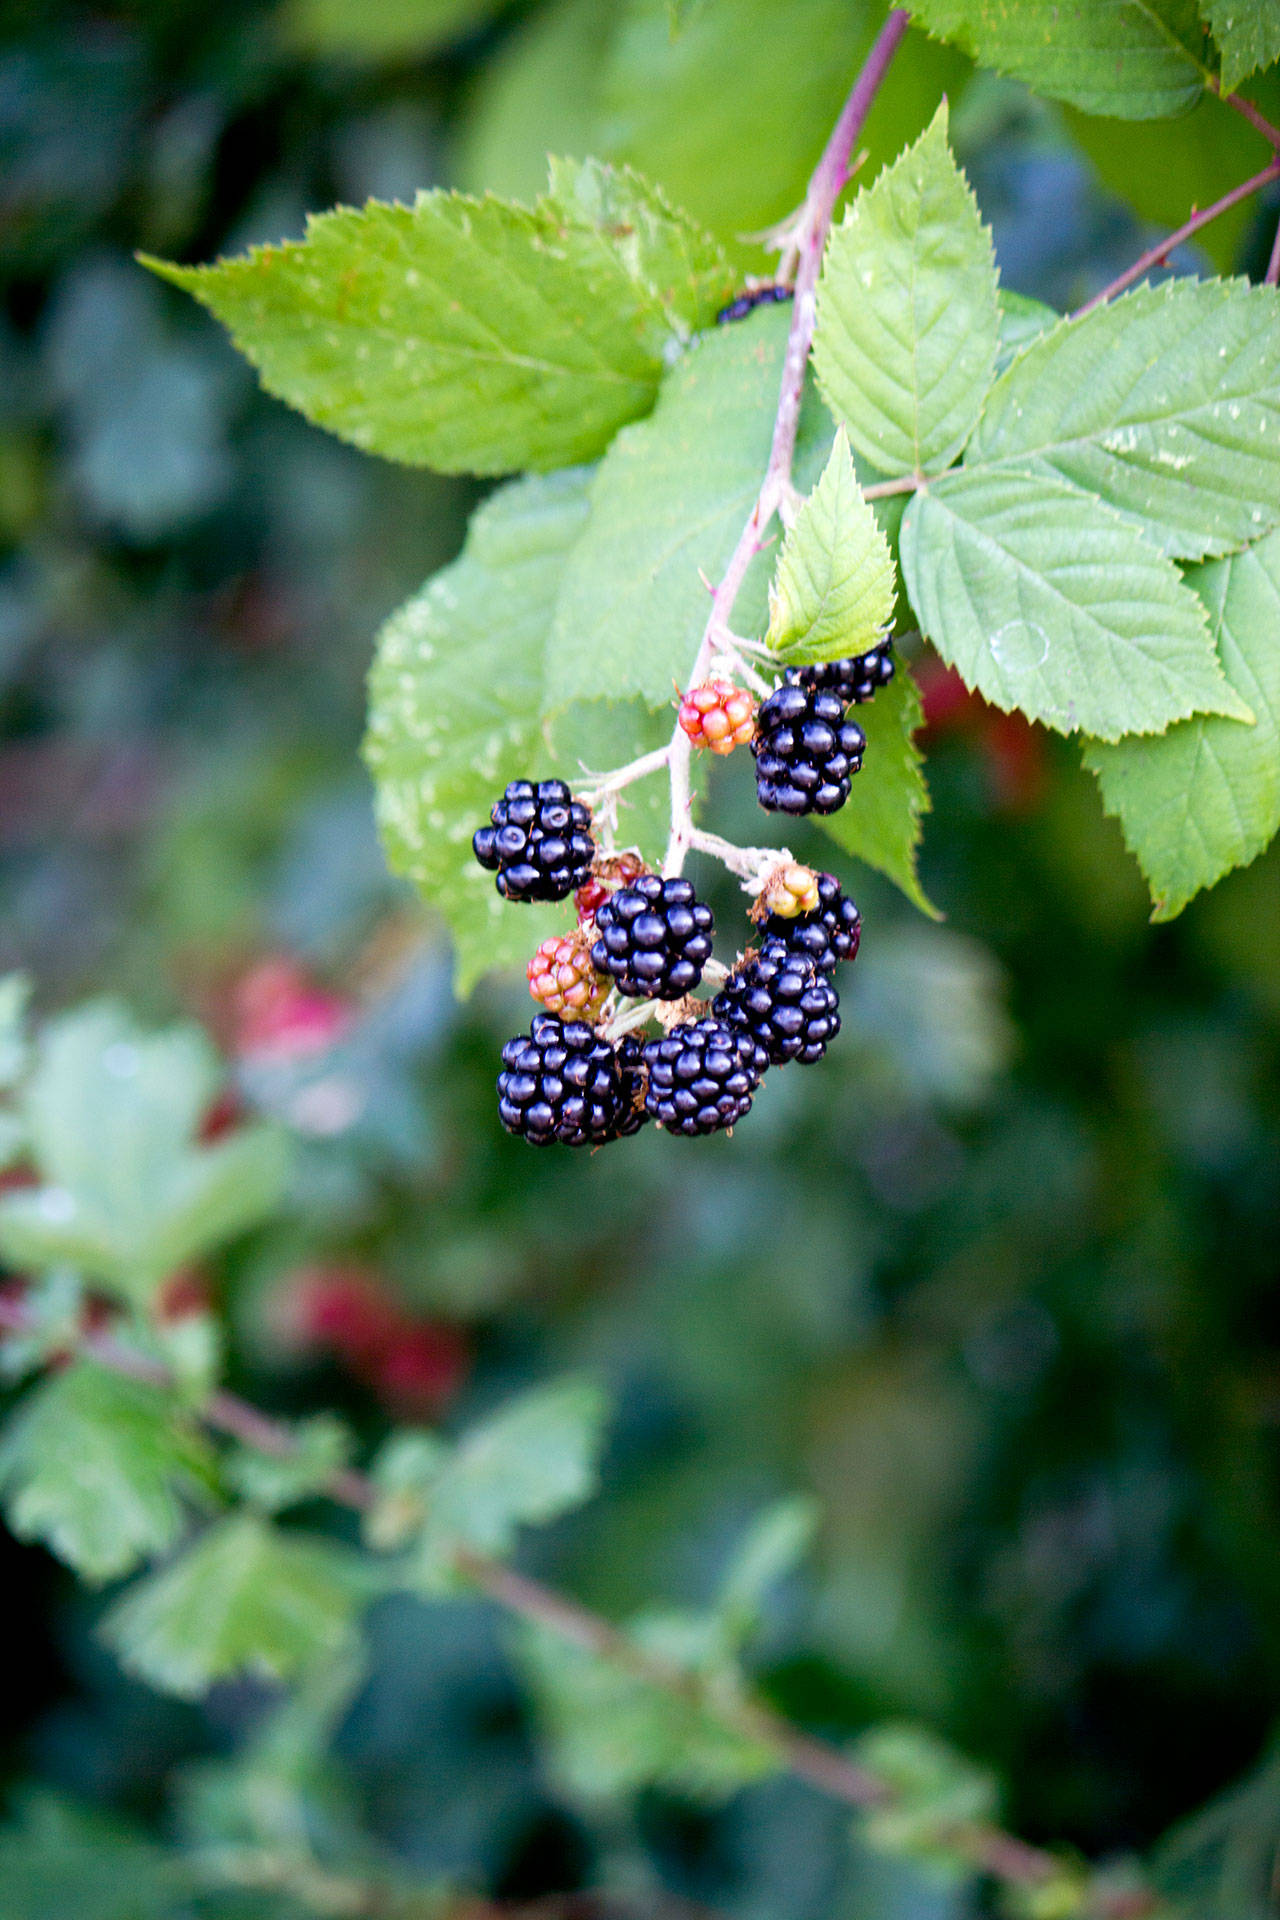 Taste the excitement of the Blackberry Festival | Kitsap Weekly